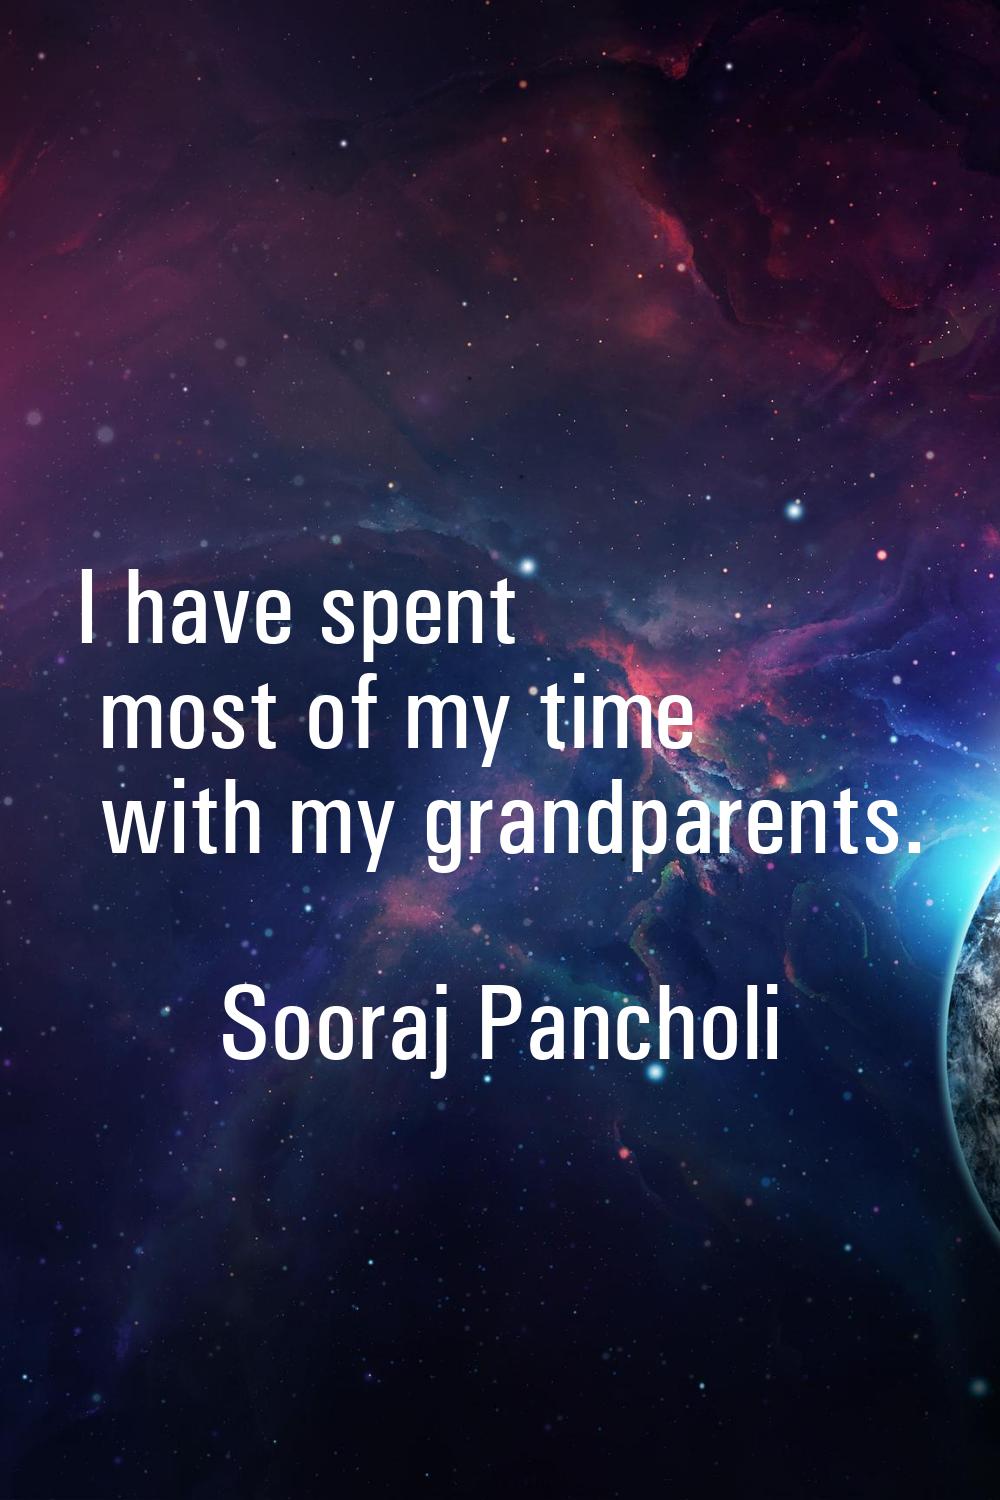 I have spent most of my time with my grandparents.